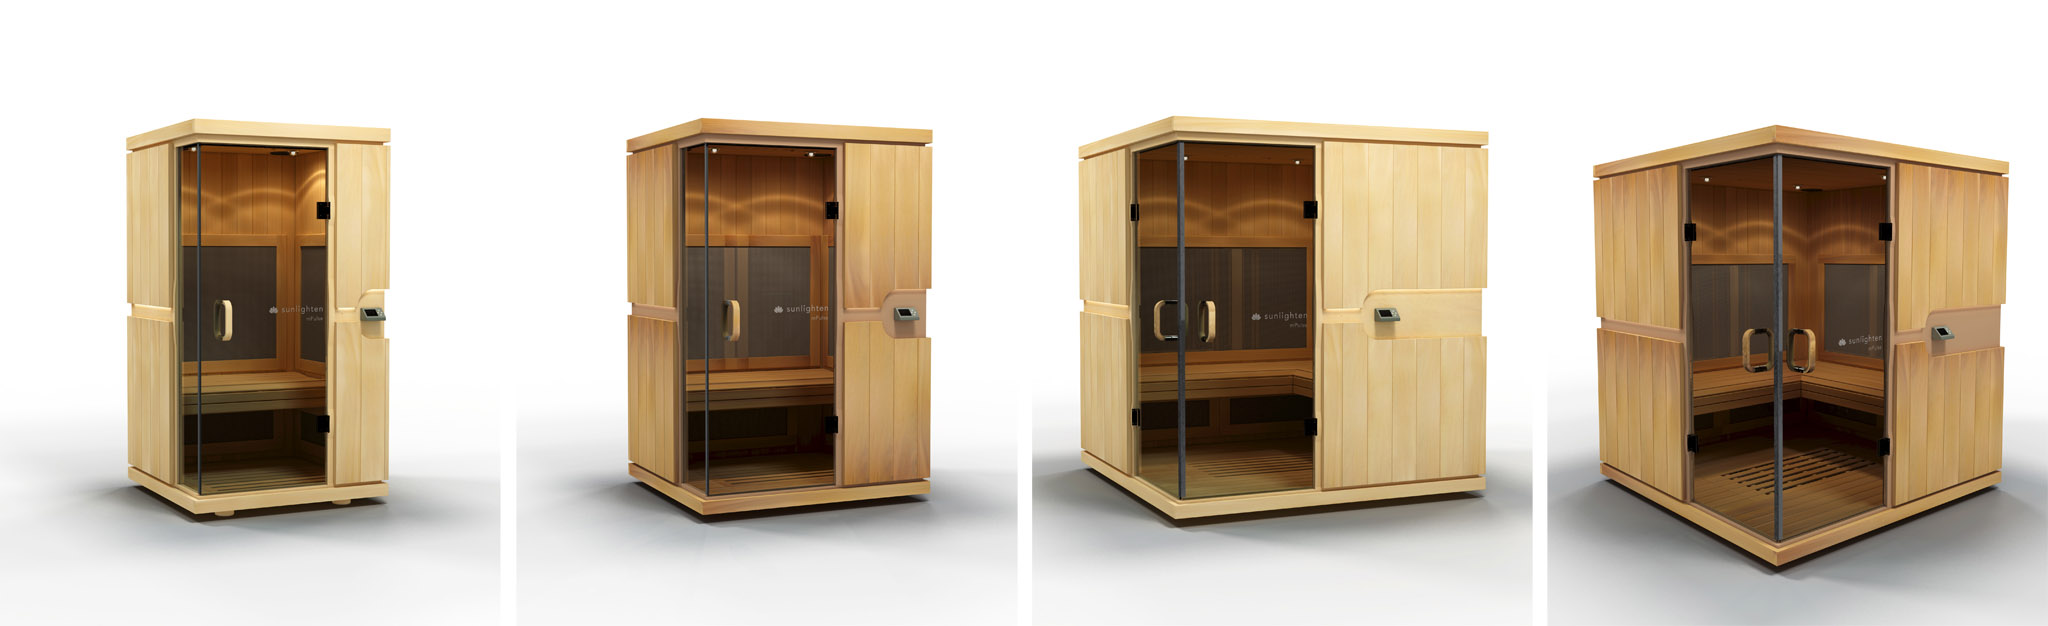 Product visualization white room "sweep" style beauty shots of the mPulse line of saunas.